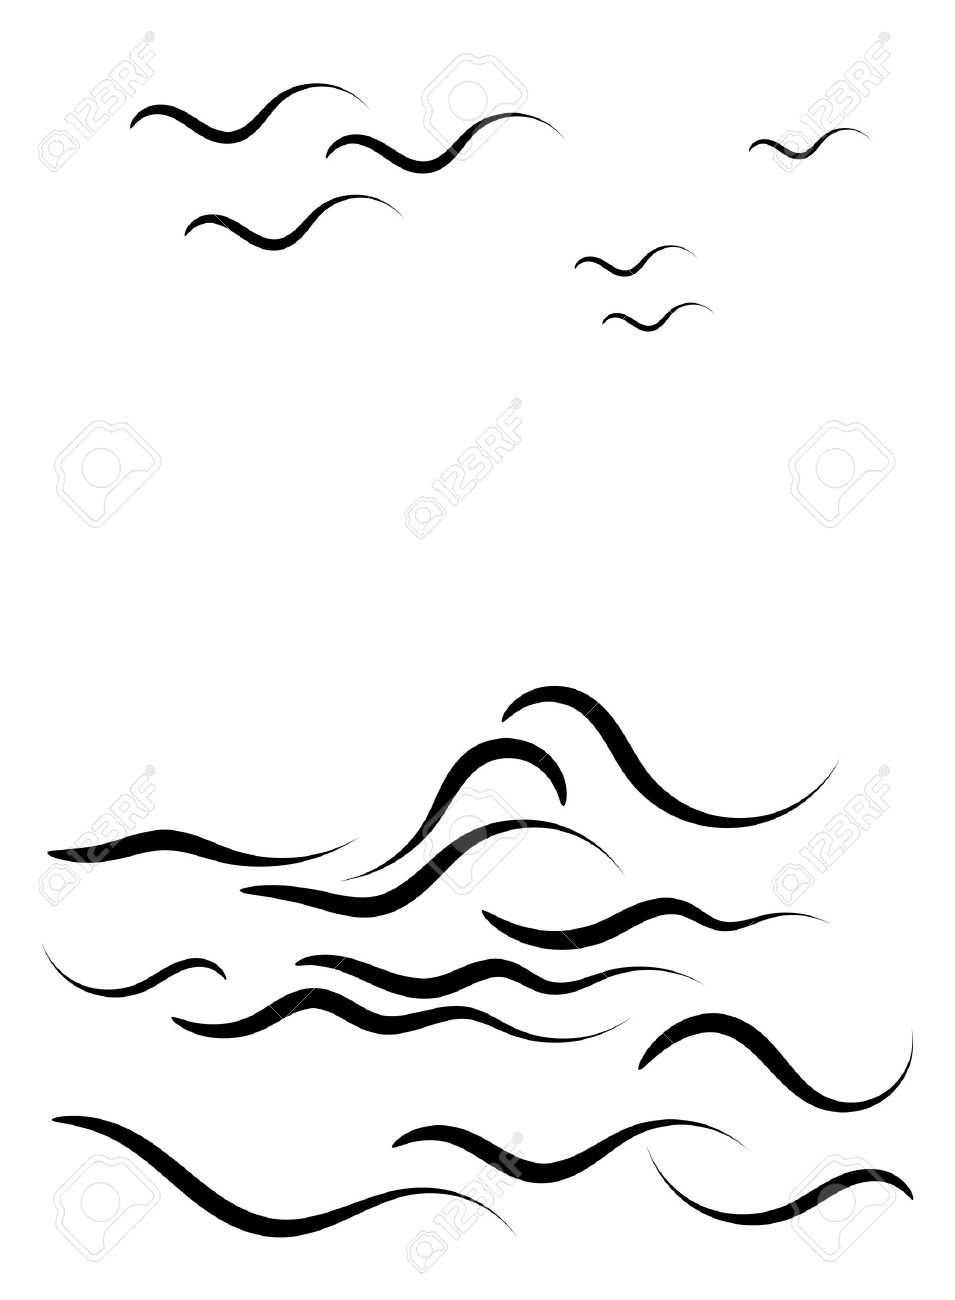 Ocean Clipart Black And White. Beautiful black silhouette of .